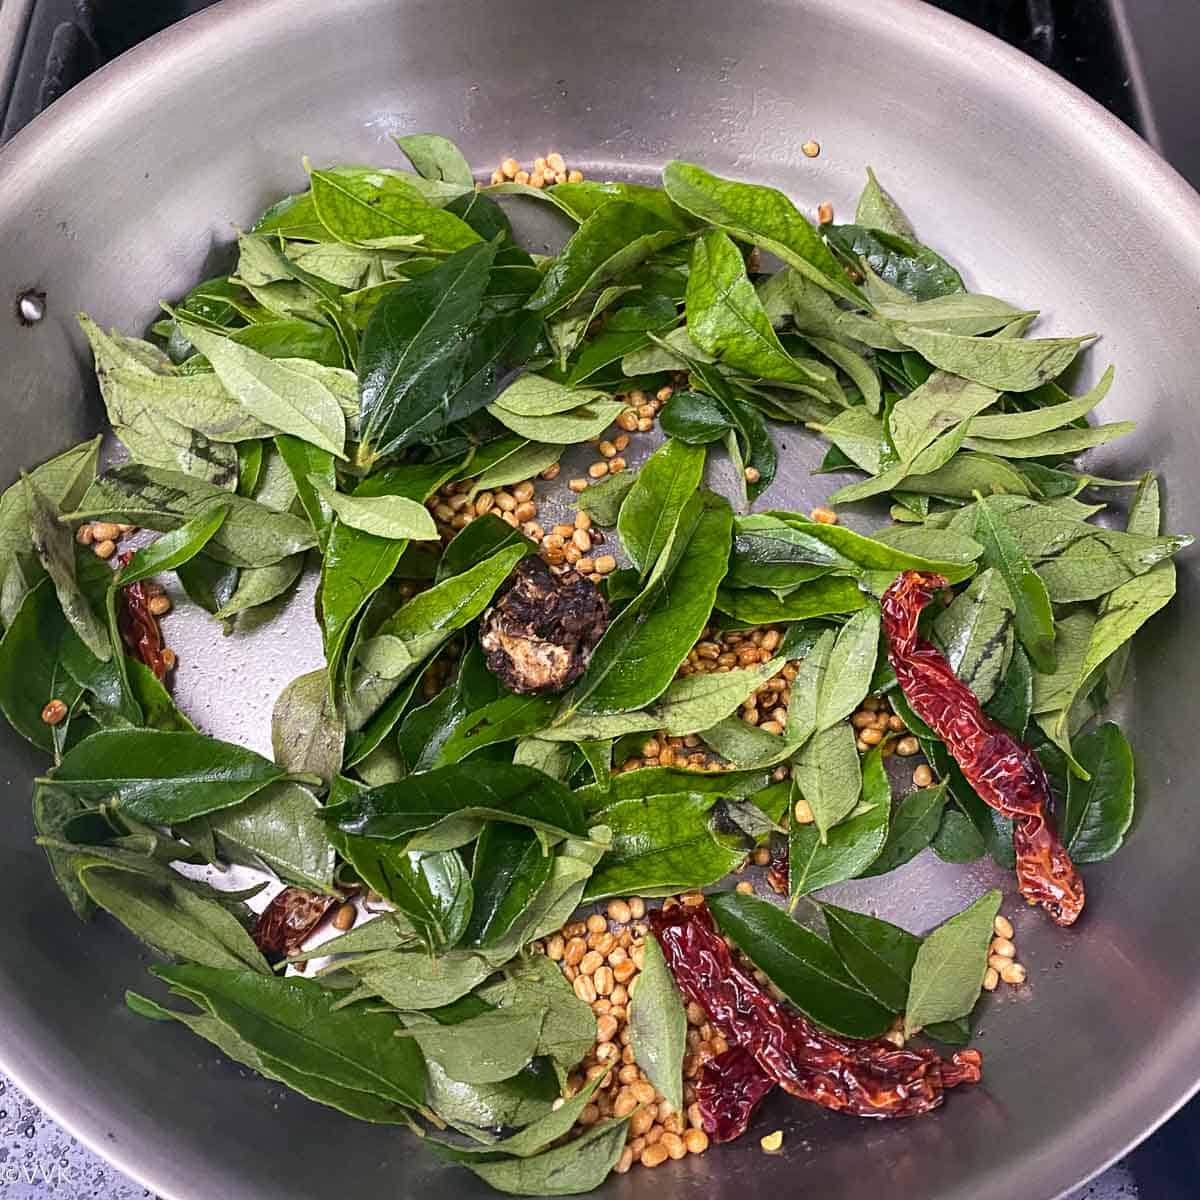 adding curry leaves and tamarind to soften them